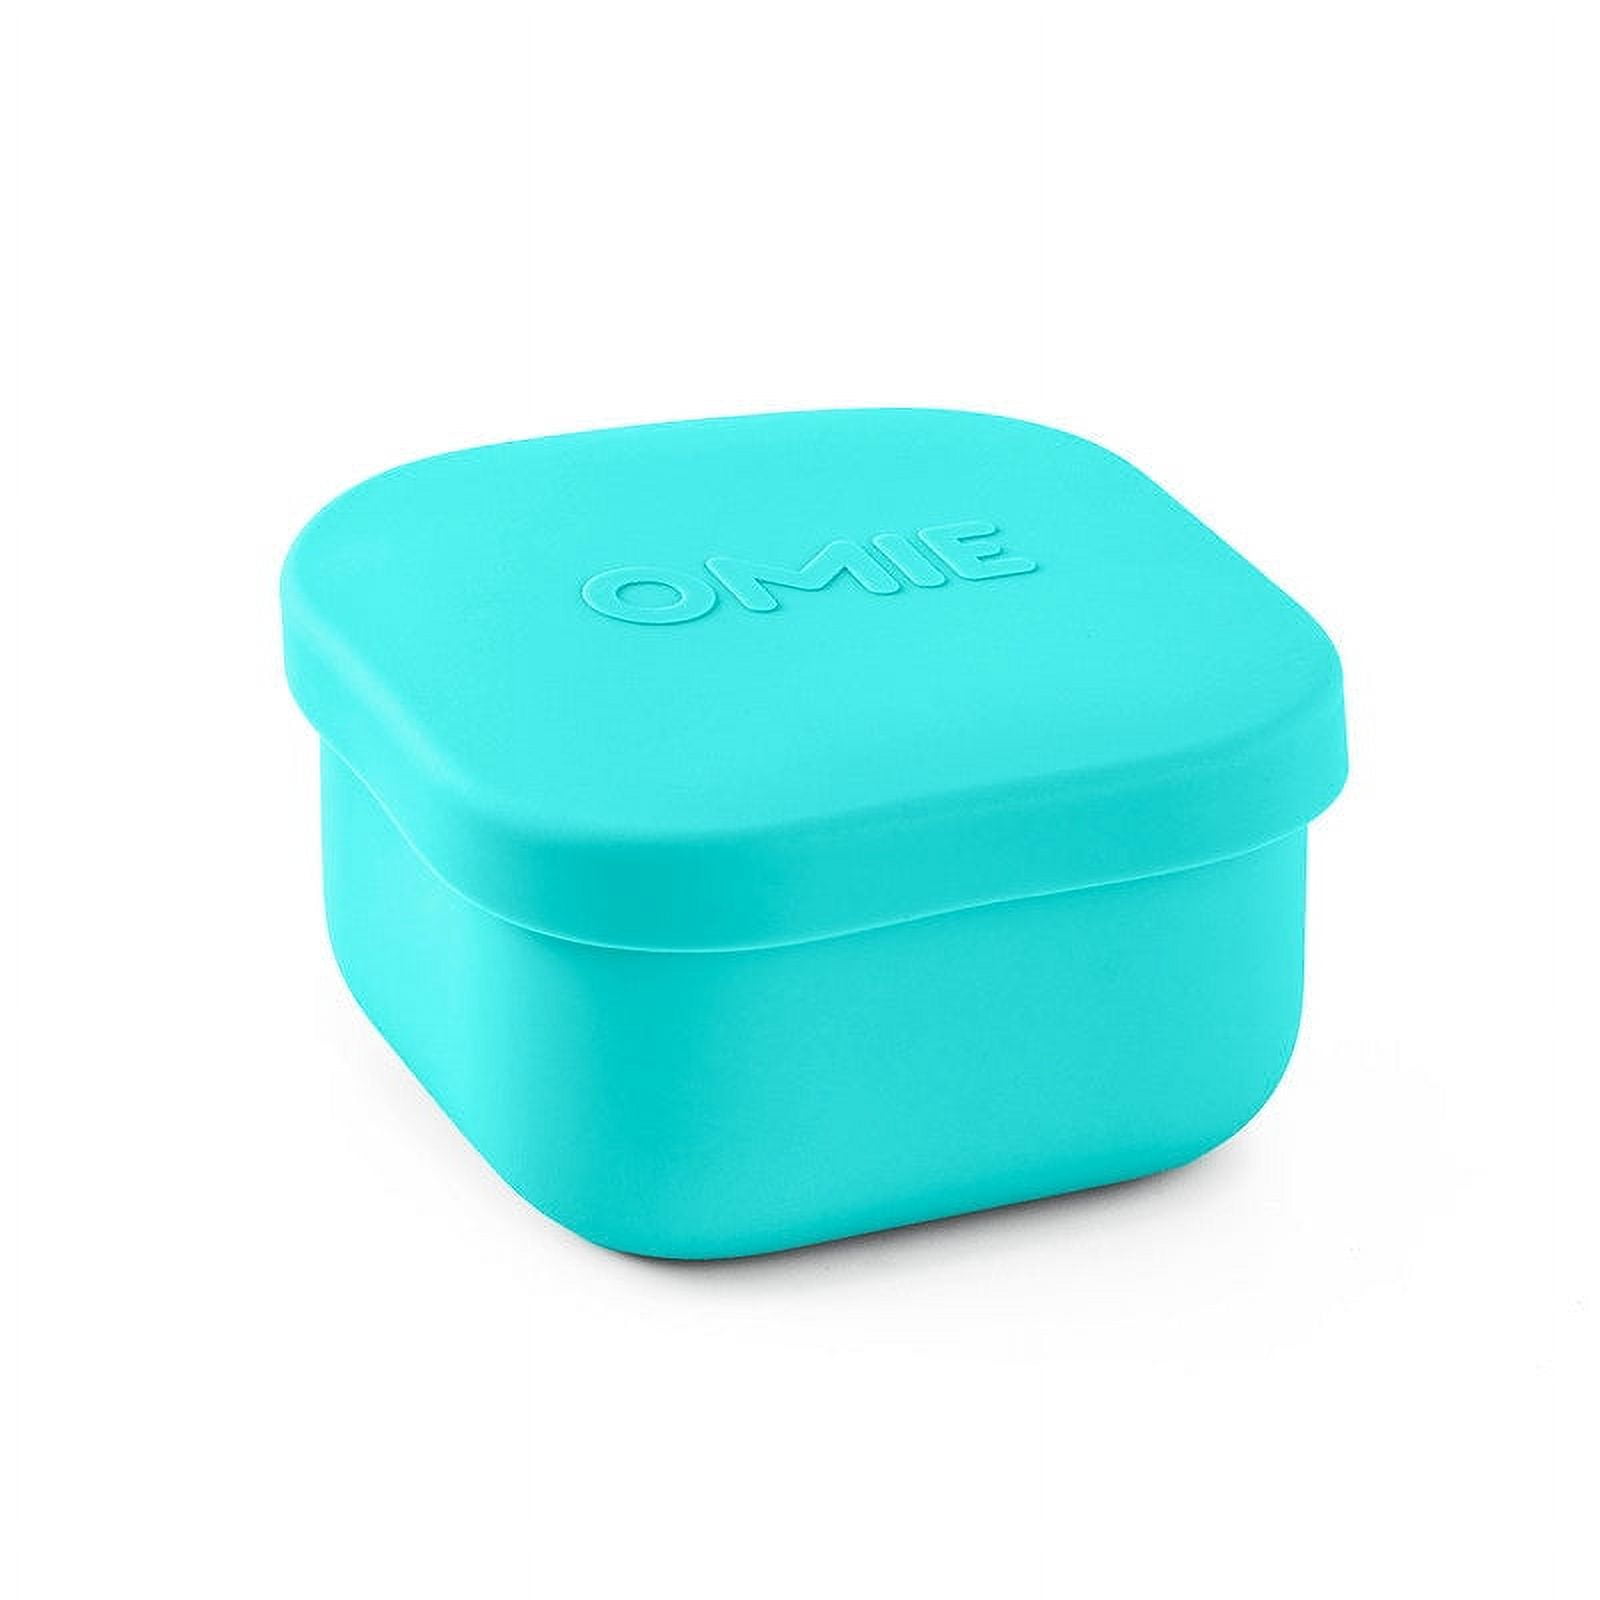 OmieSnack Silicone Food Storage Container 9.4 oz for OmieBox - Pink